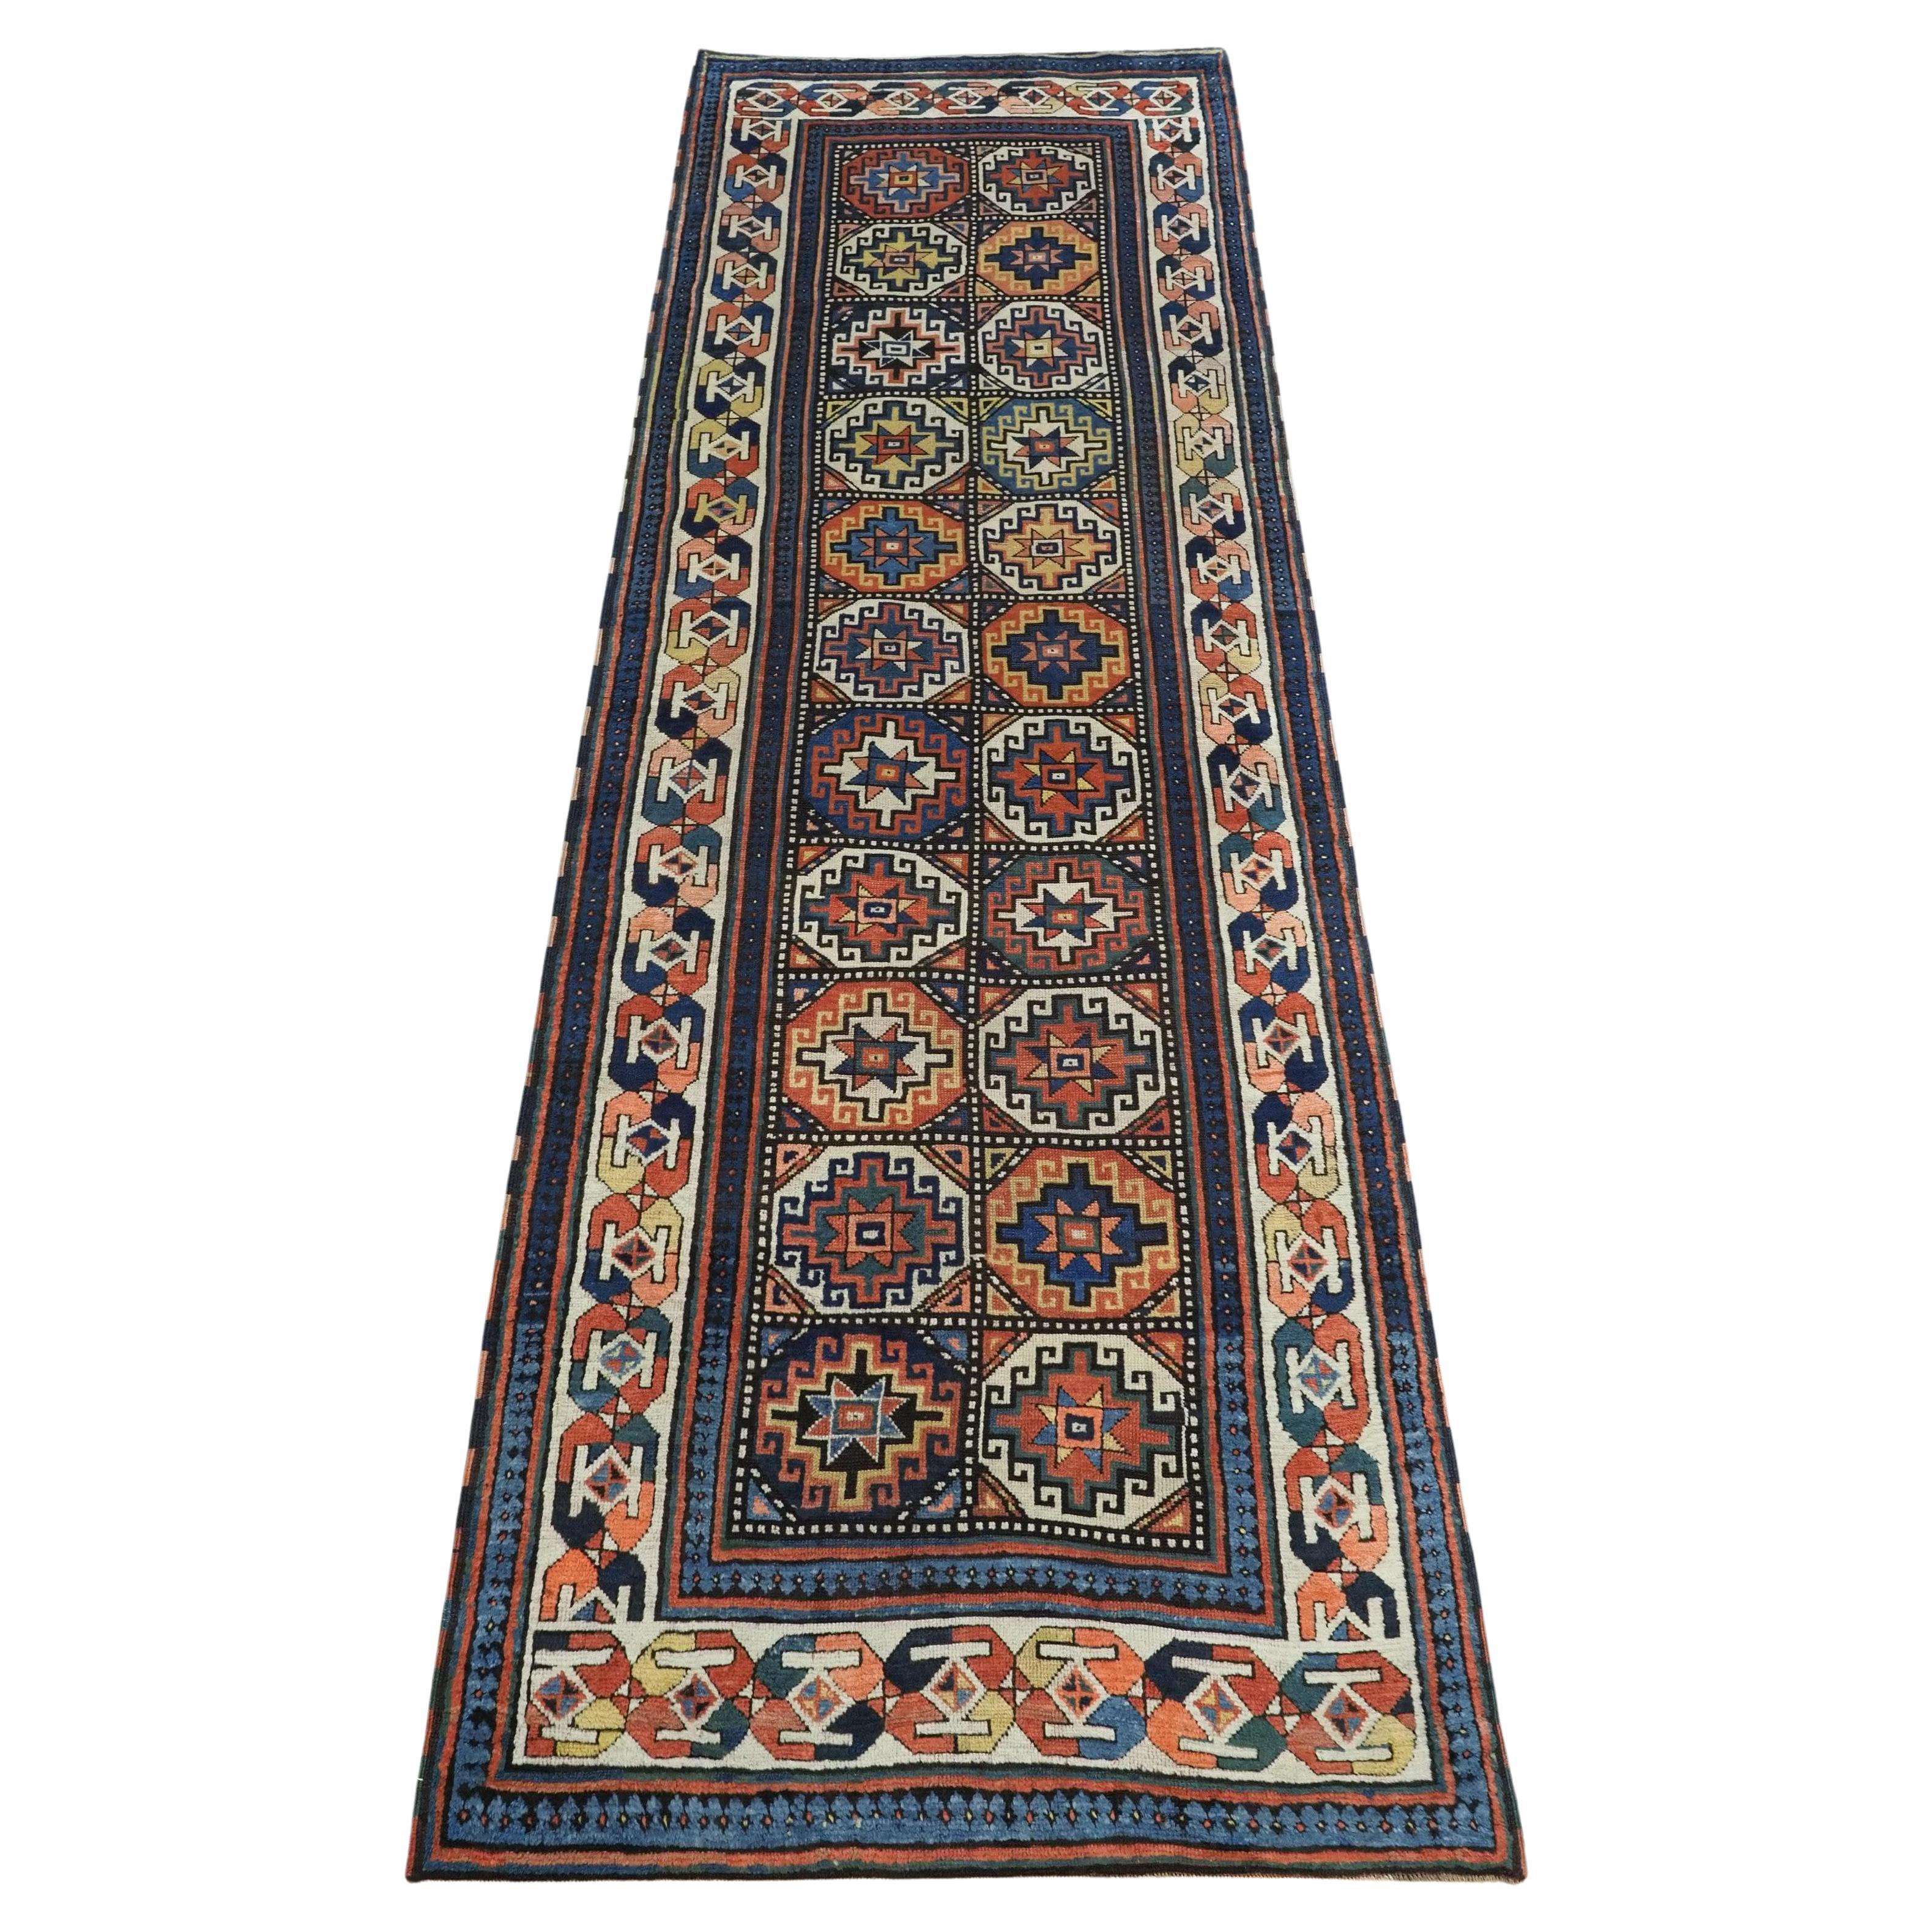 Antique South Caucasian Moghan Kazak runner with Memling guls within octagons. For Sale